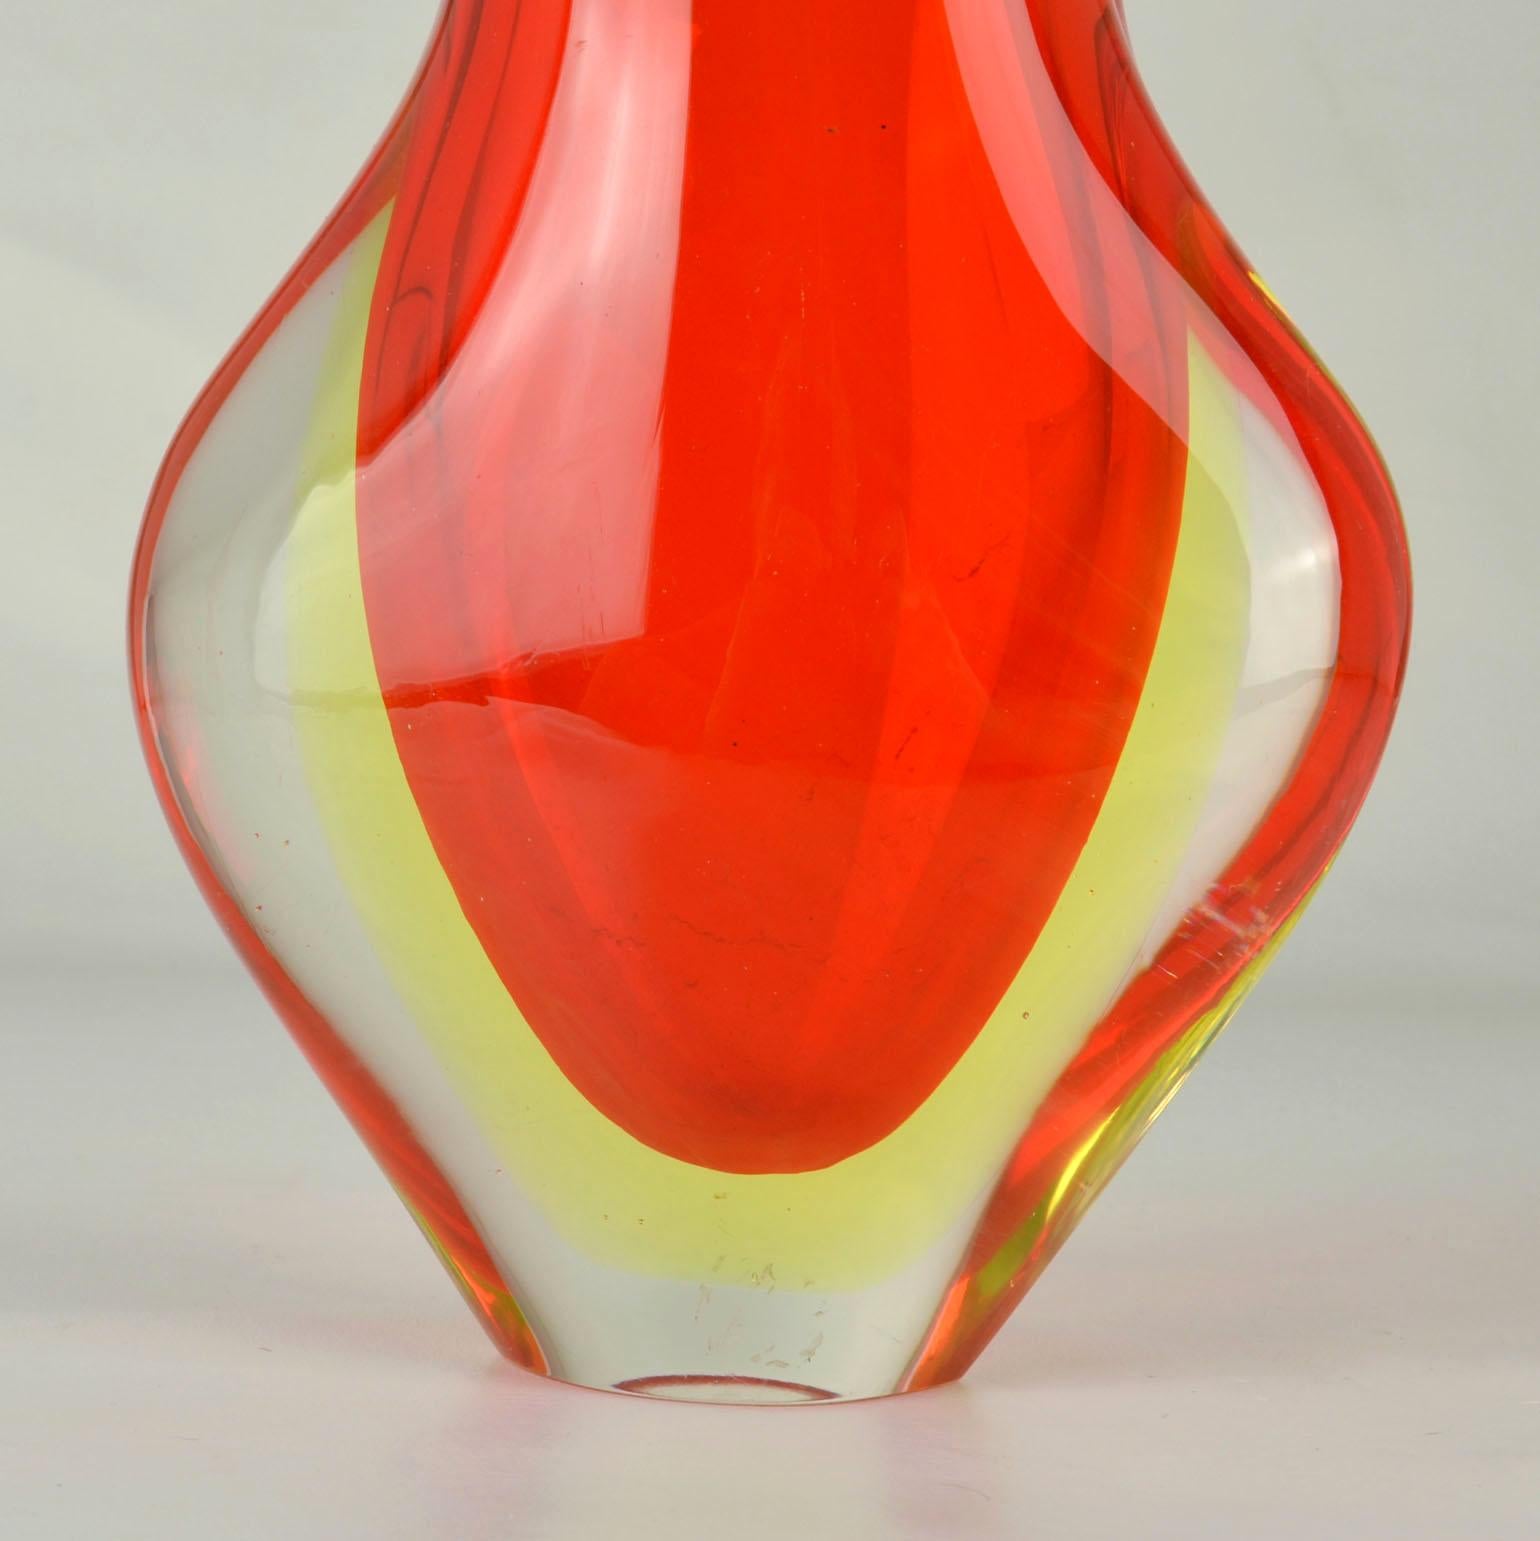 Mid-20th Century Murano Sommerso Red Glass Vases by Flavio Poli for Seguso, Italy, 1960s For Sale